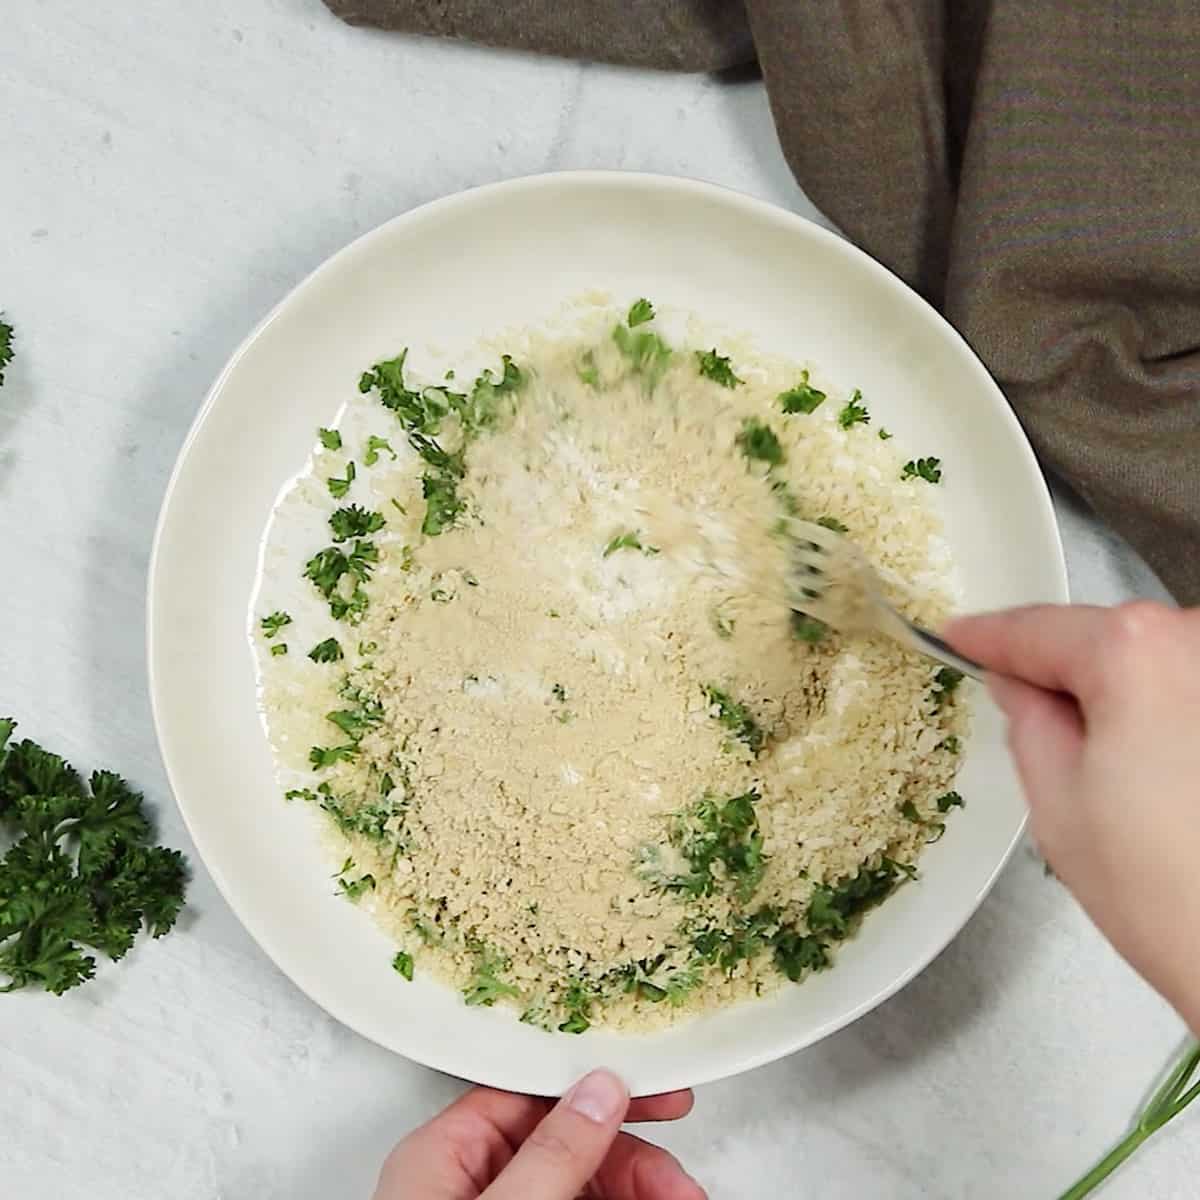 Mixing up some flour and breadcrumbs and chopped parsley.